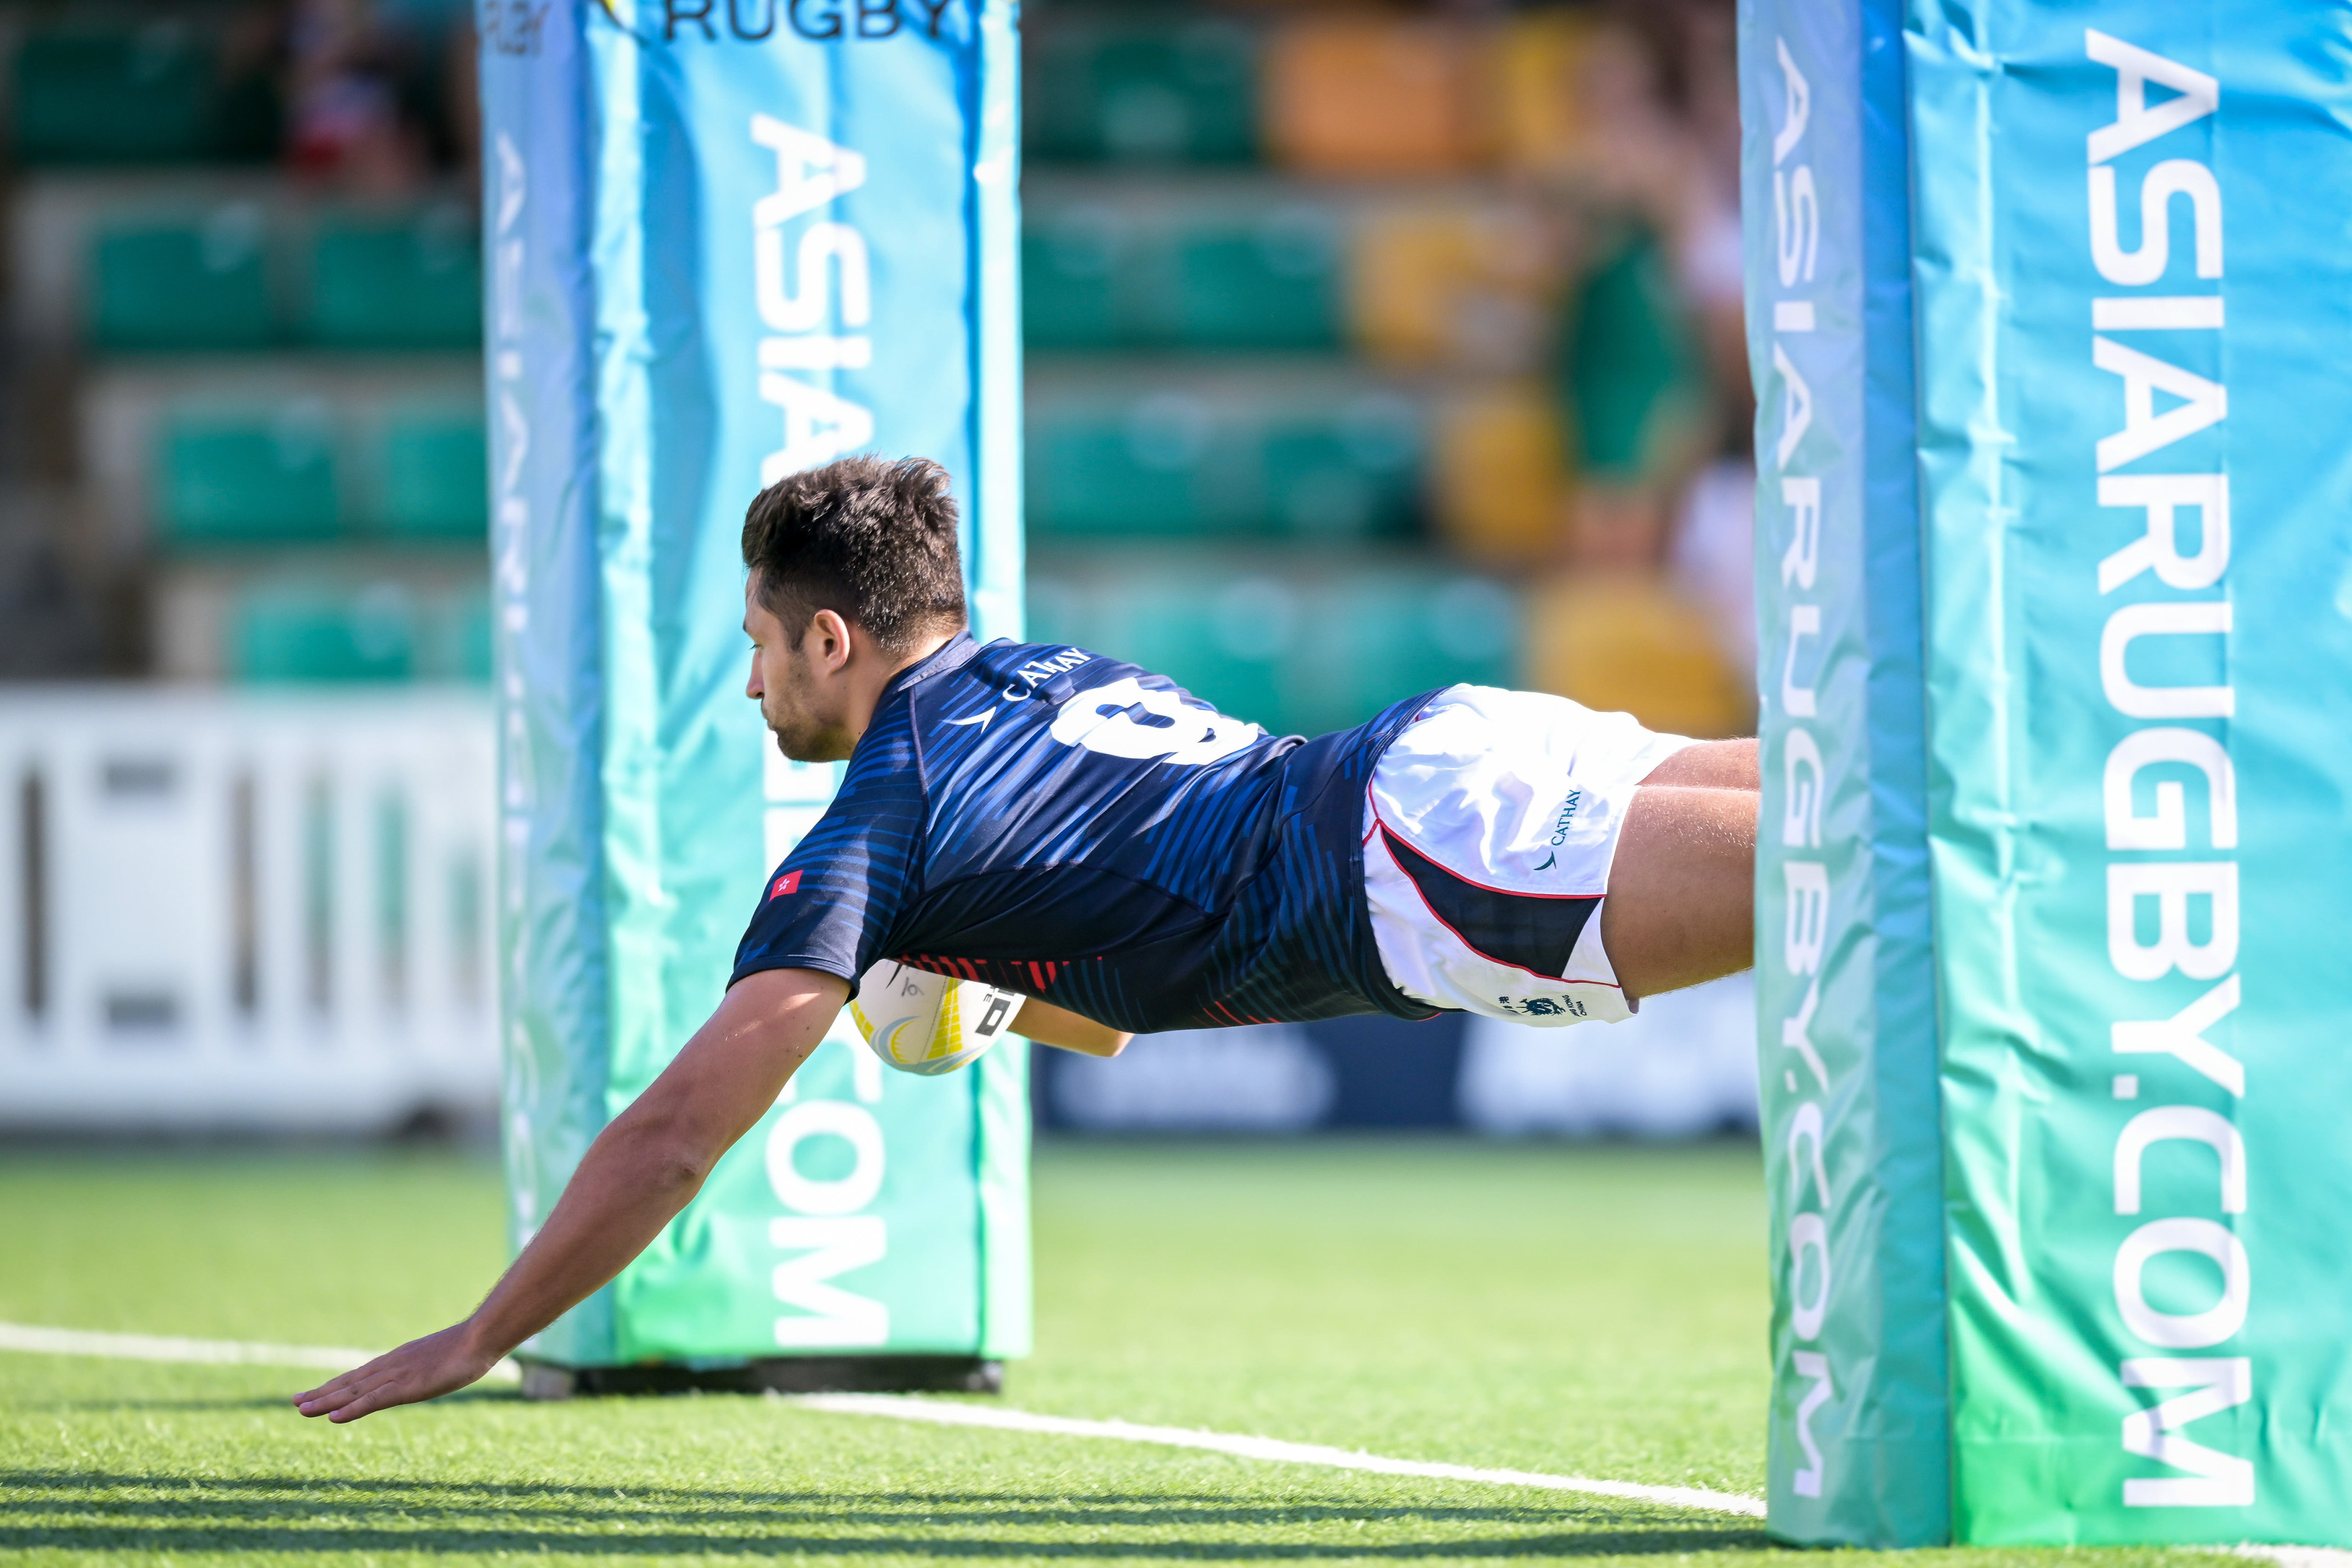 Hong Kong scrum-half Jamie Lauder dives in under the posts to score his side’s first try against Malaysia in the Asia Rugby Championship clash at Hong Kong Football Club. Photo: Handout.